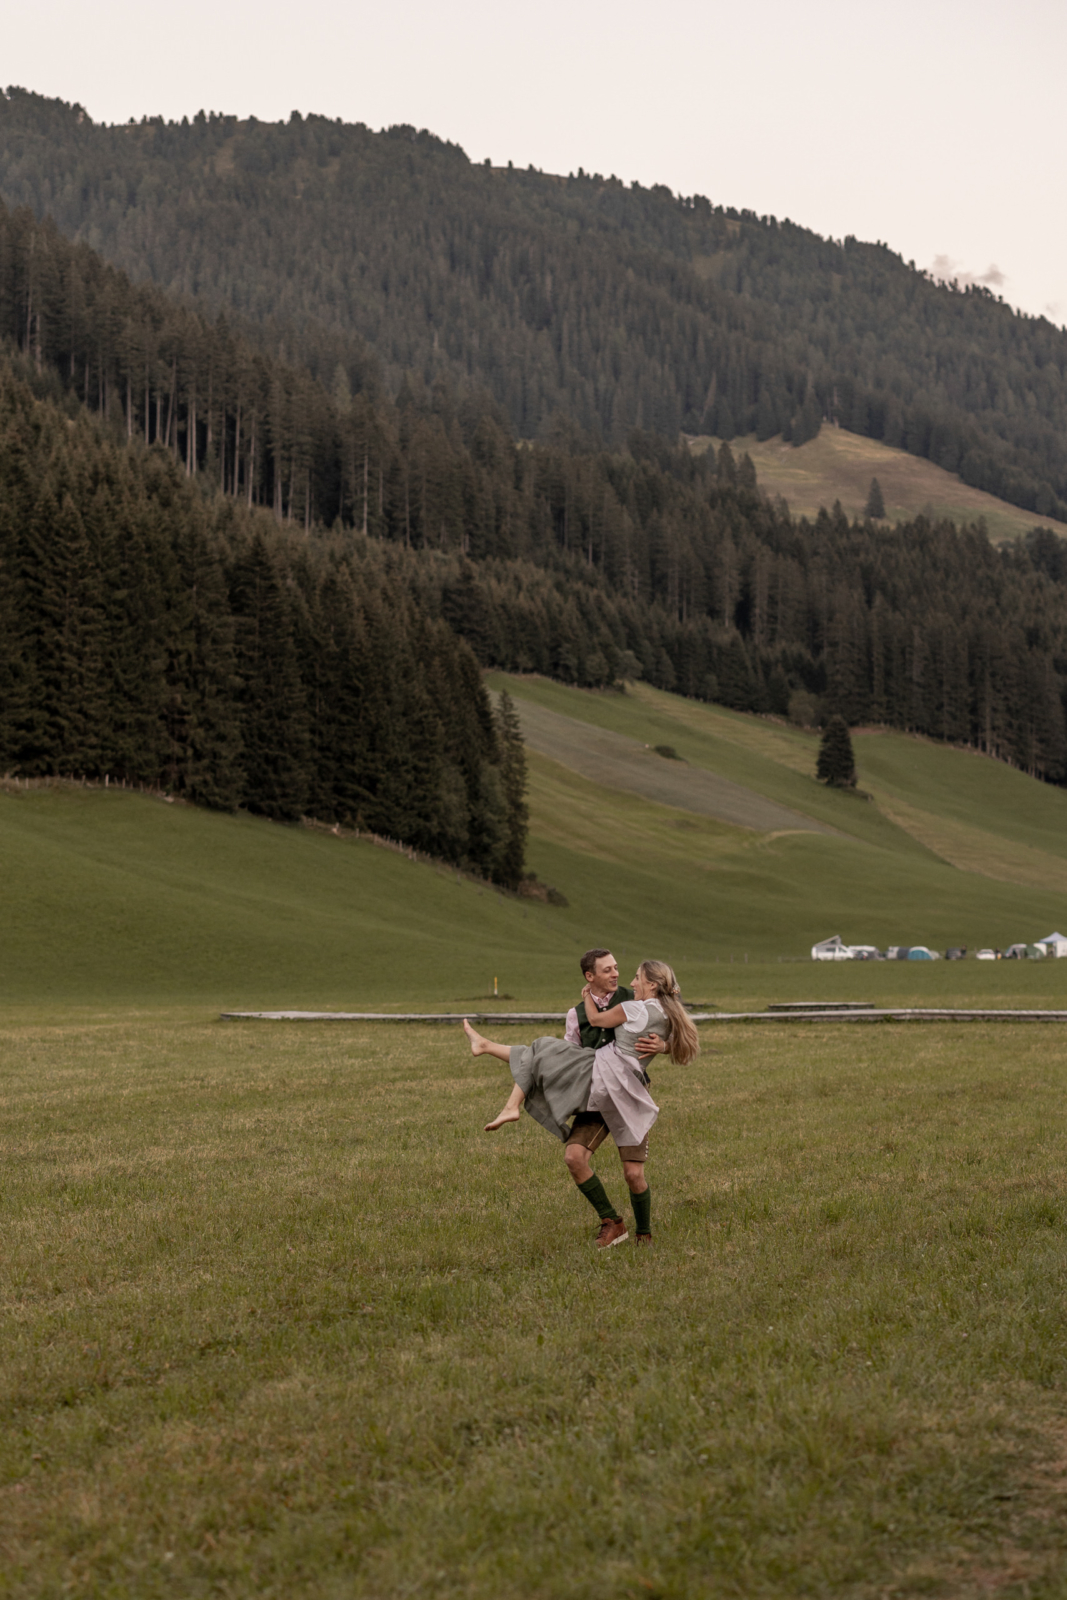 Sound of the Music - frolicking in the Alps